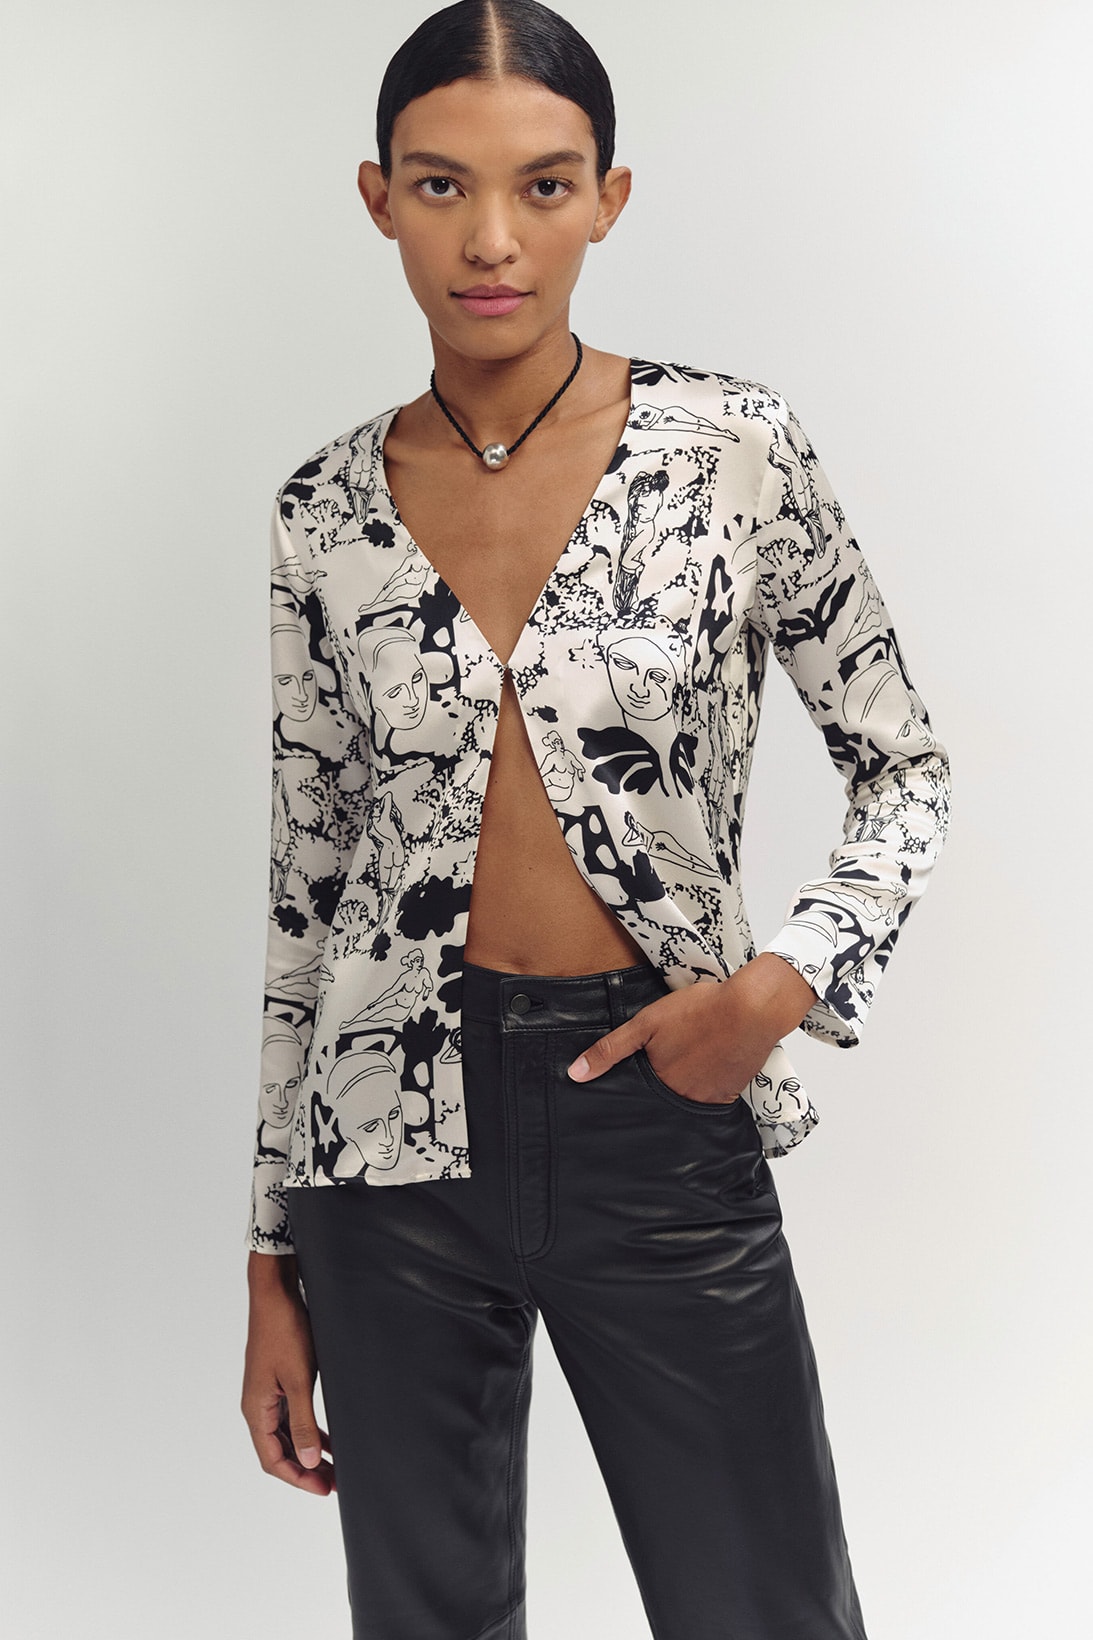 Reformation Fine Prints Artist Collection Collaboration Top